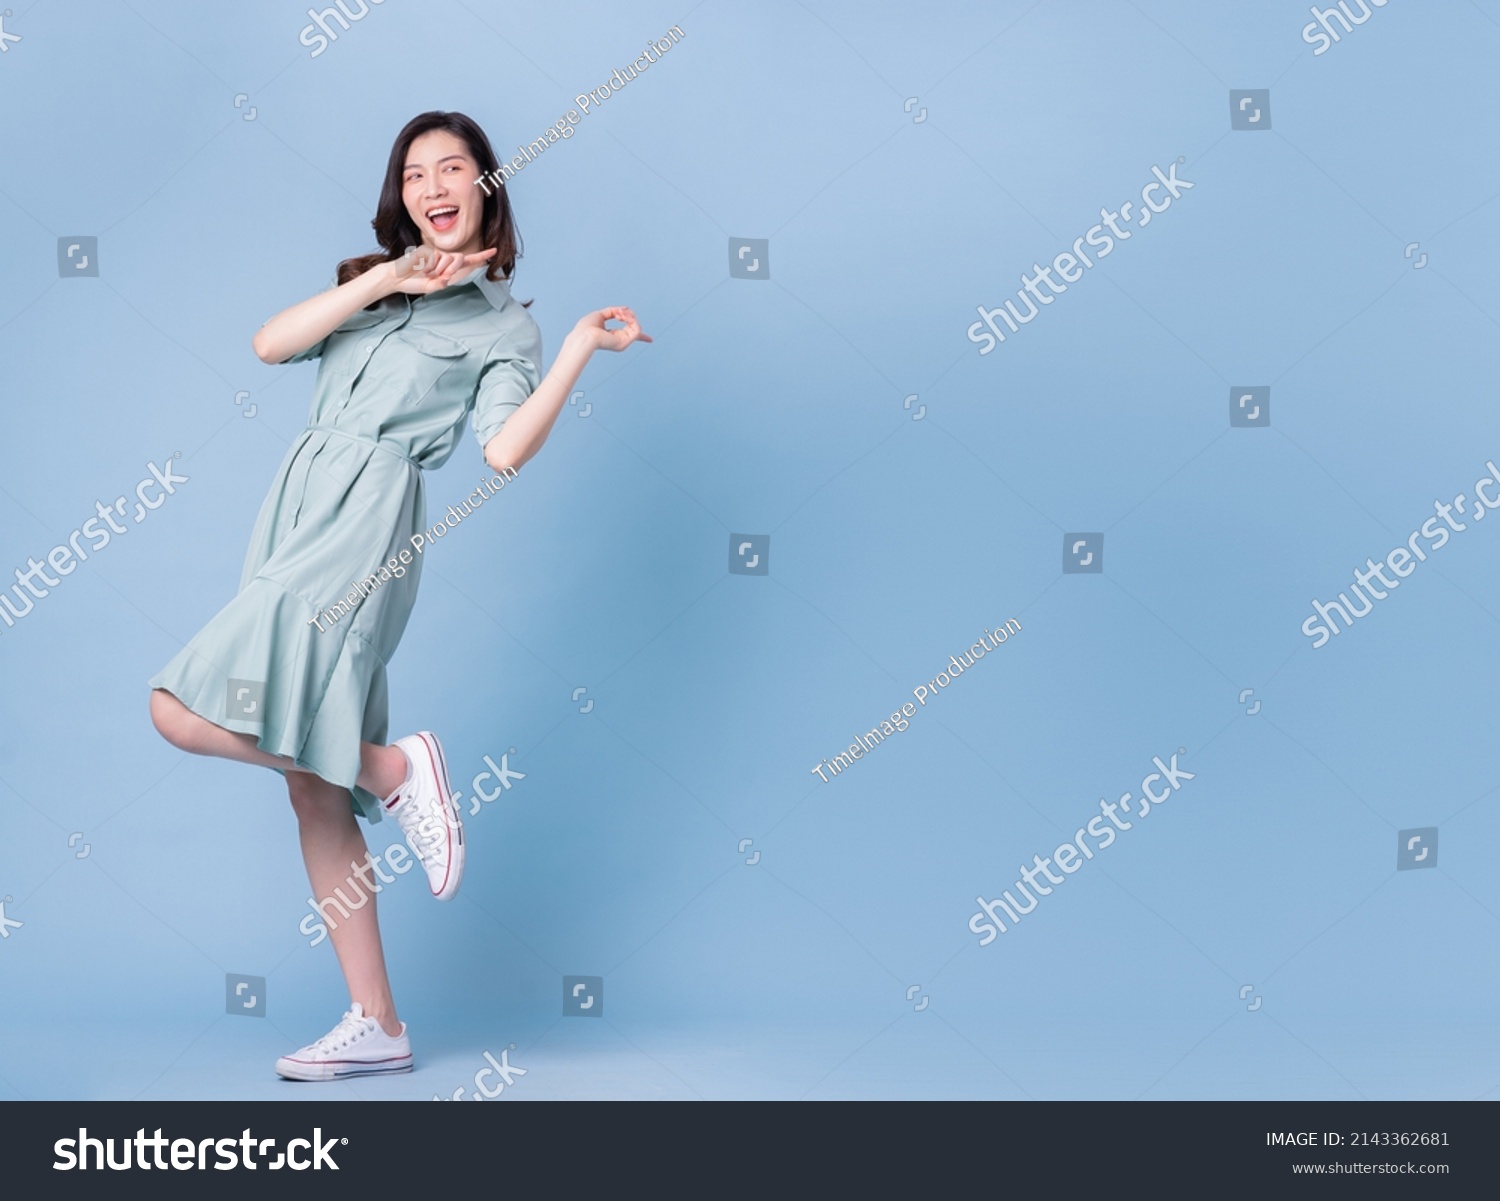 Full length image of young Asian woman wearing dress on blue background #2143362681